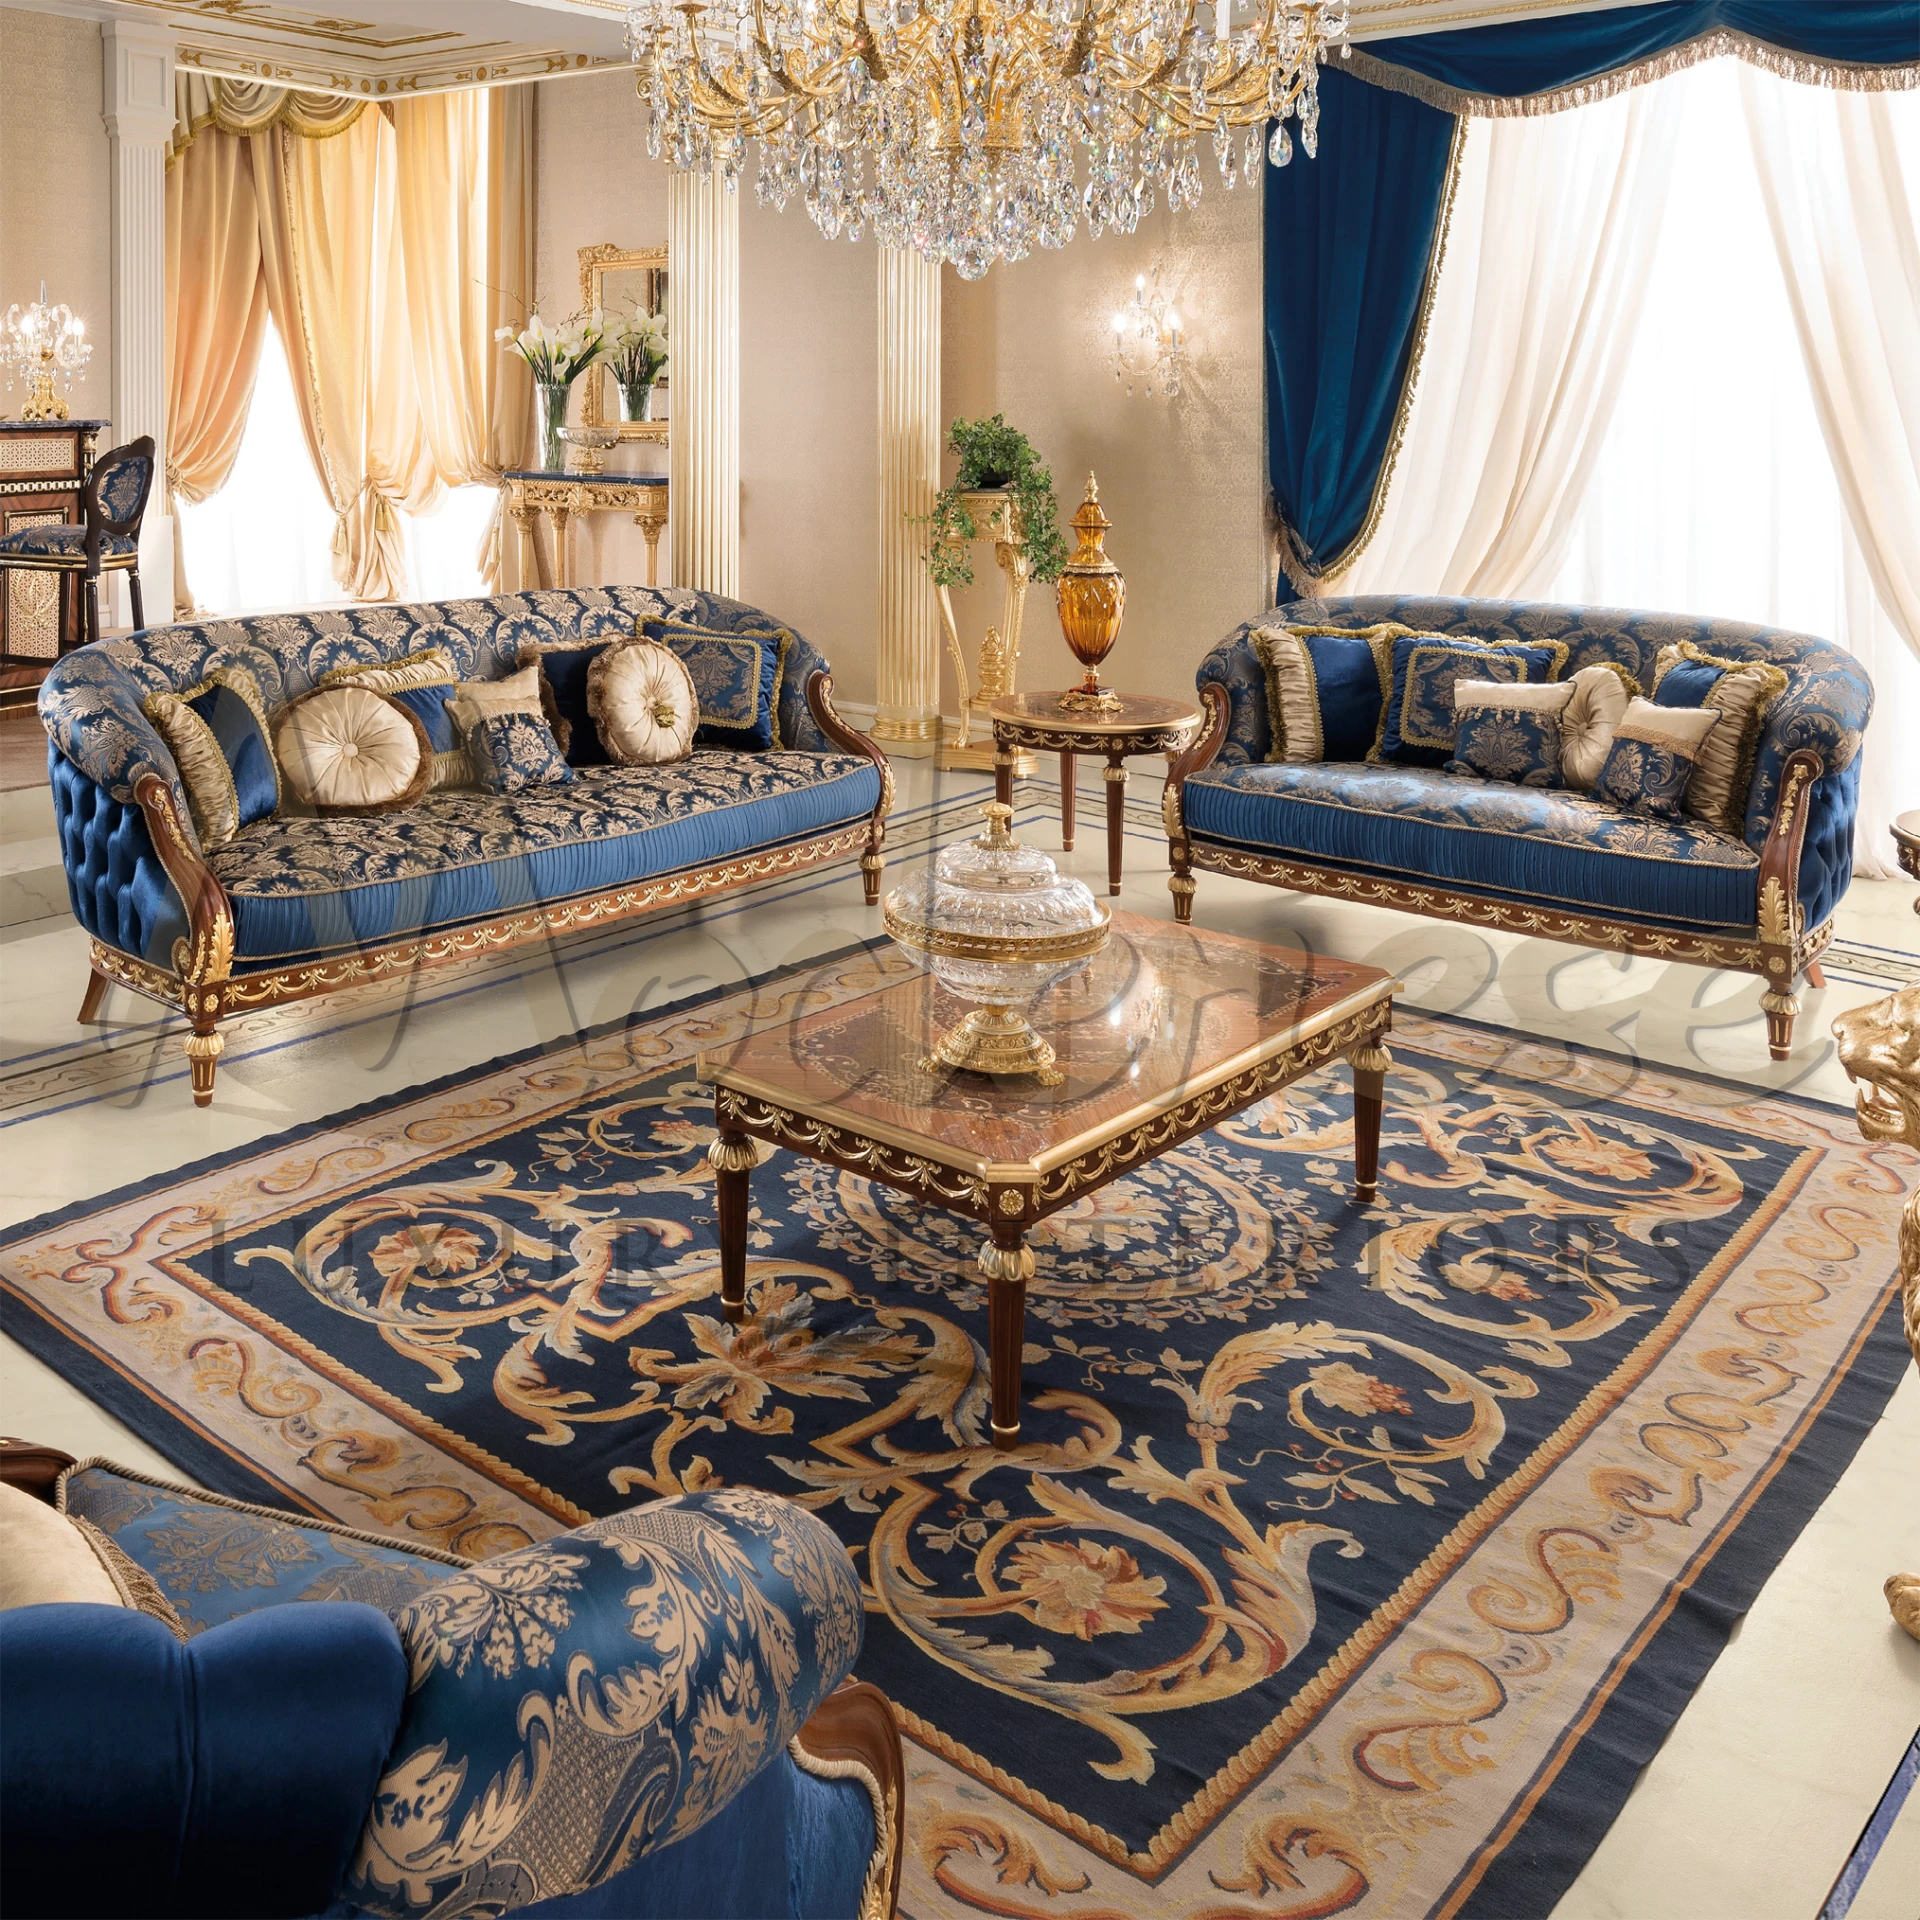 Elegant Royal Blue Pillow, made in Italy, showcasing rich textures and sophisticated patterns for a luxurious classical style.